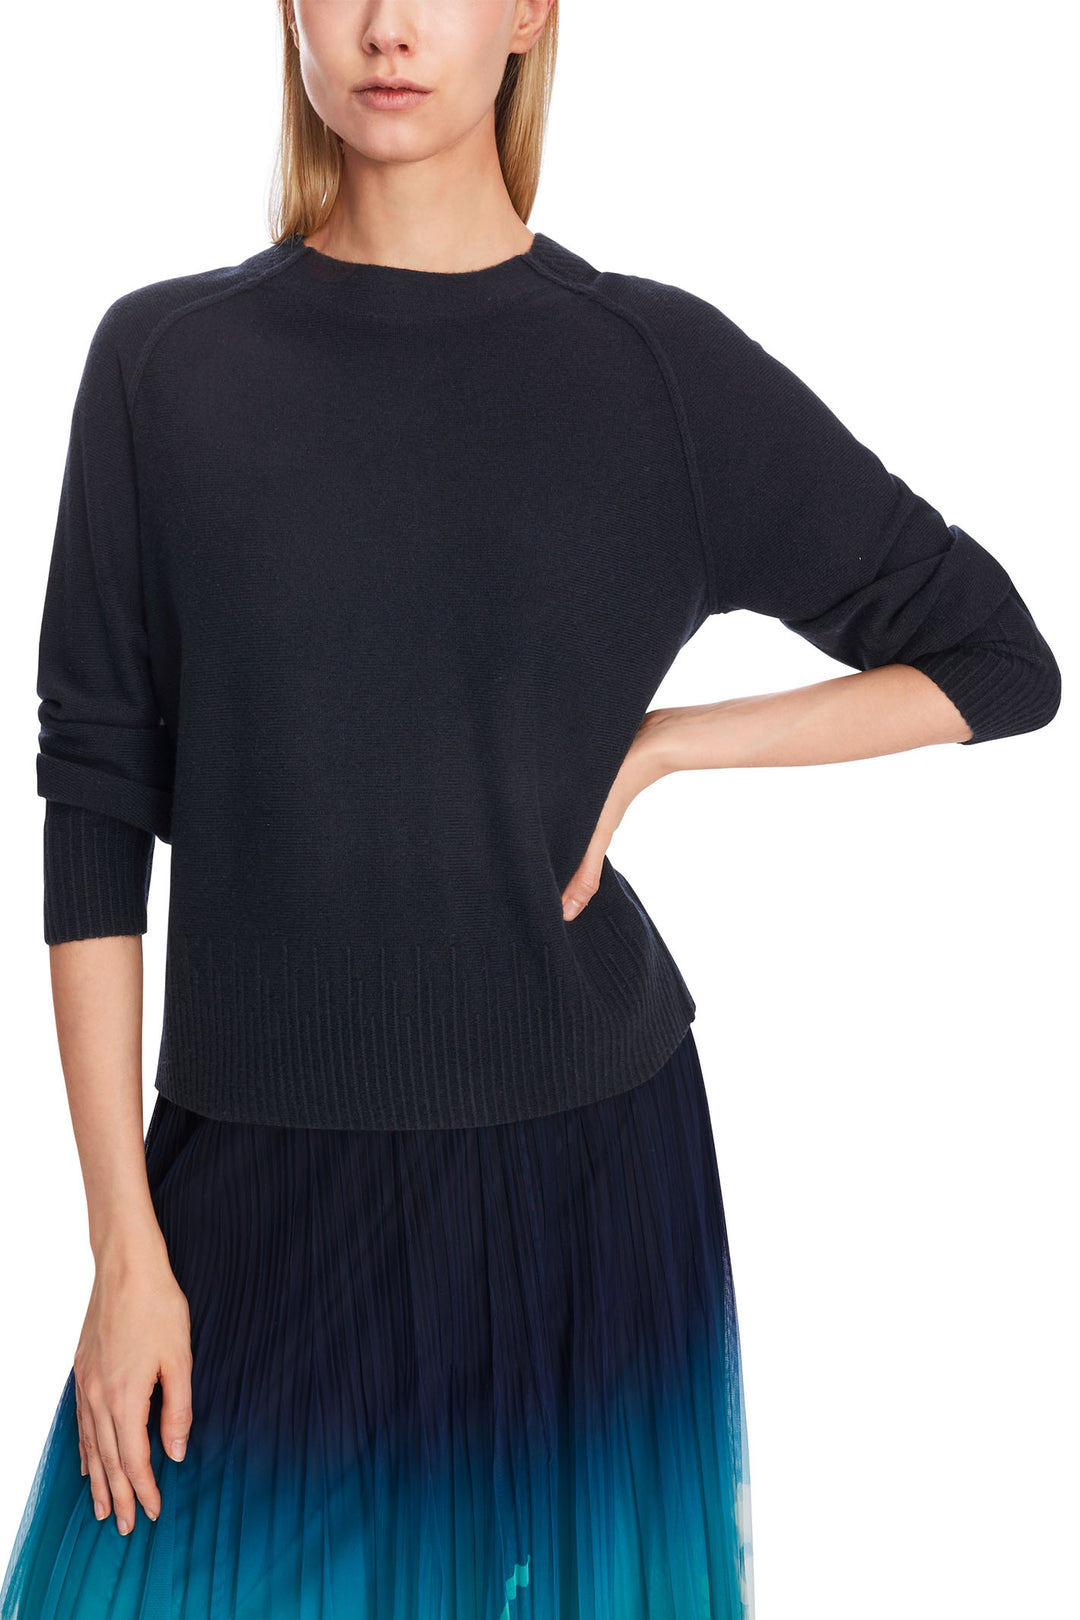 Marc Cain Collection XC 41.25 M51 395 Midnight Blue Jumper - Olivia Grace Fashion